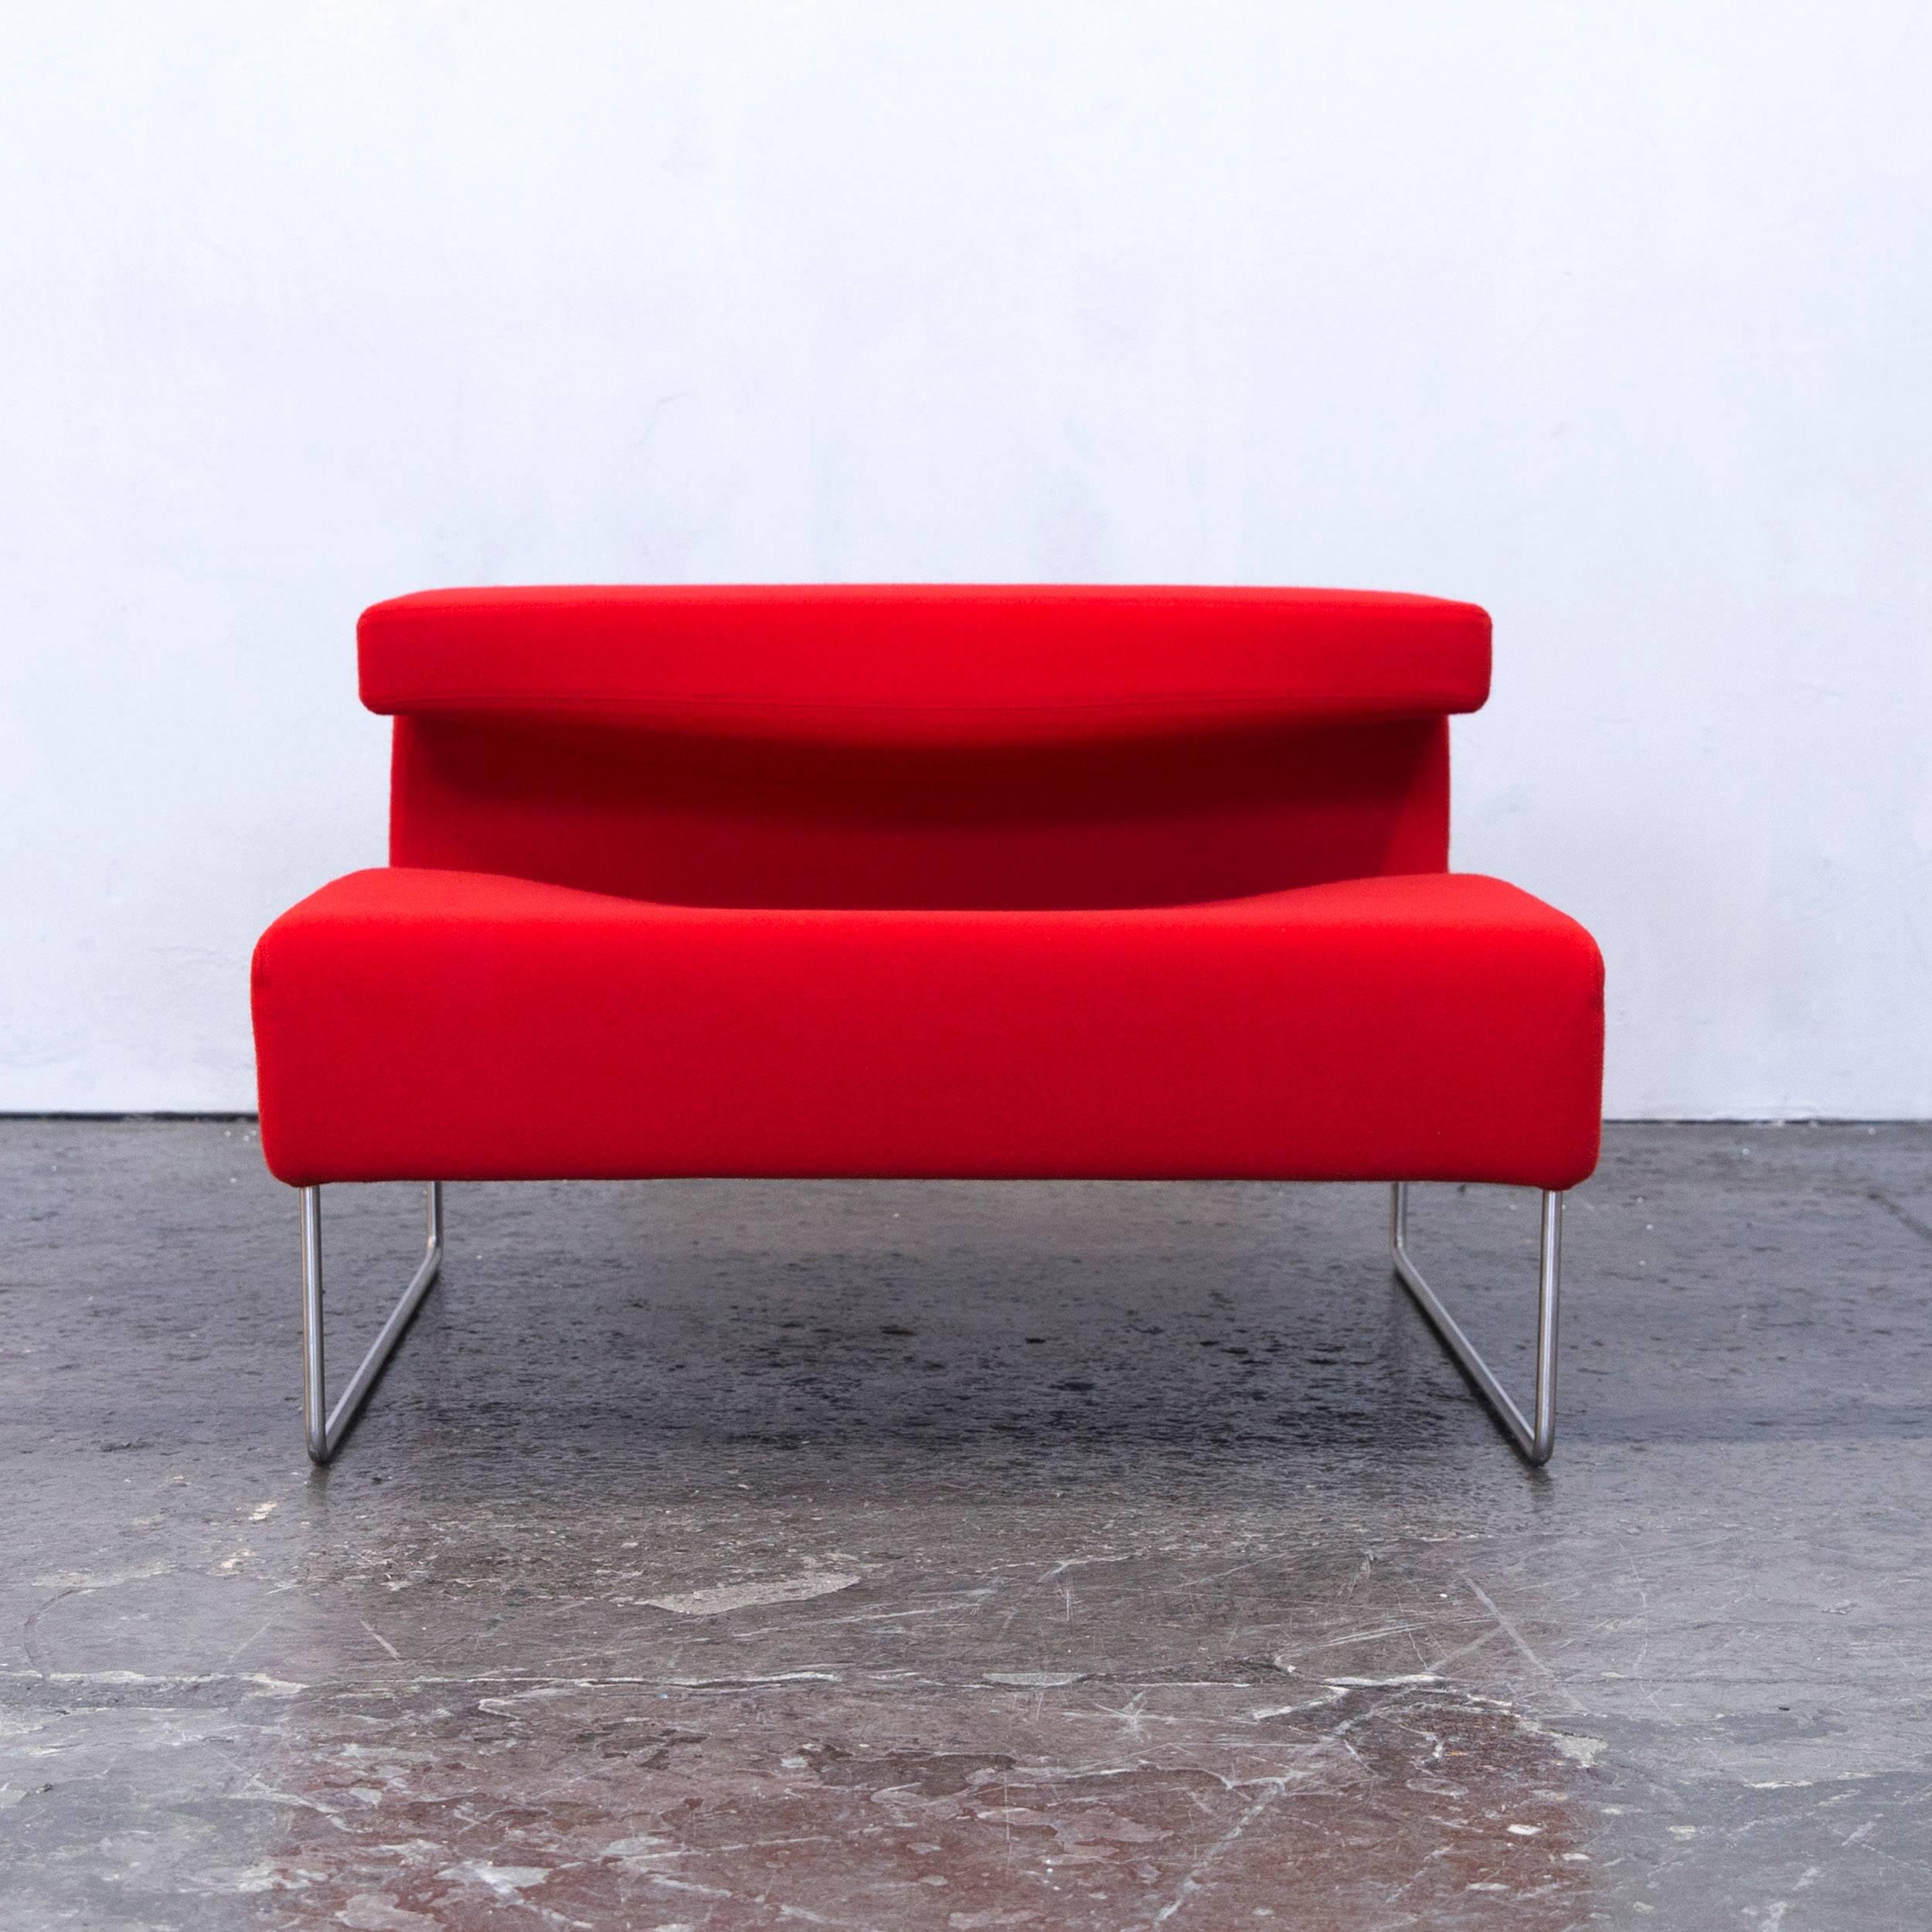 Red colored original Moroso lowseat designer chair, in a minimalistic and modern design, made for pure comfort and style.